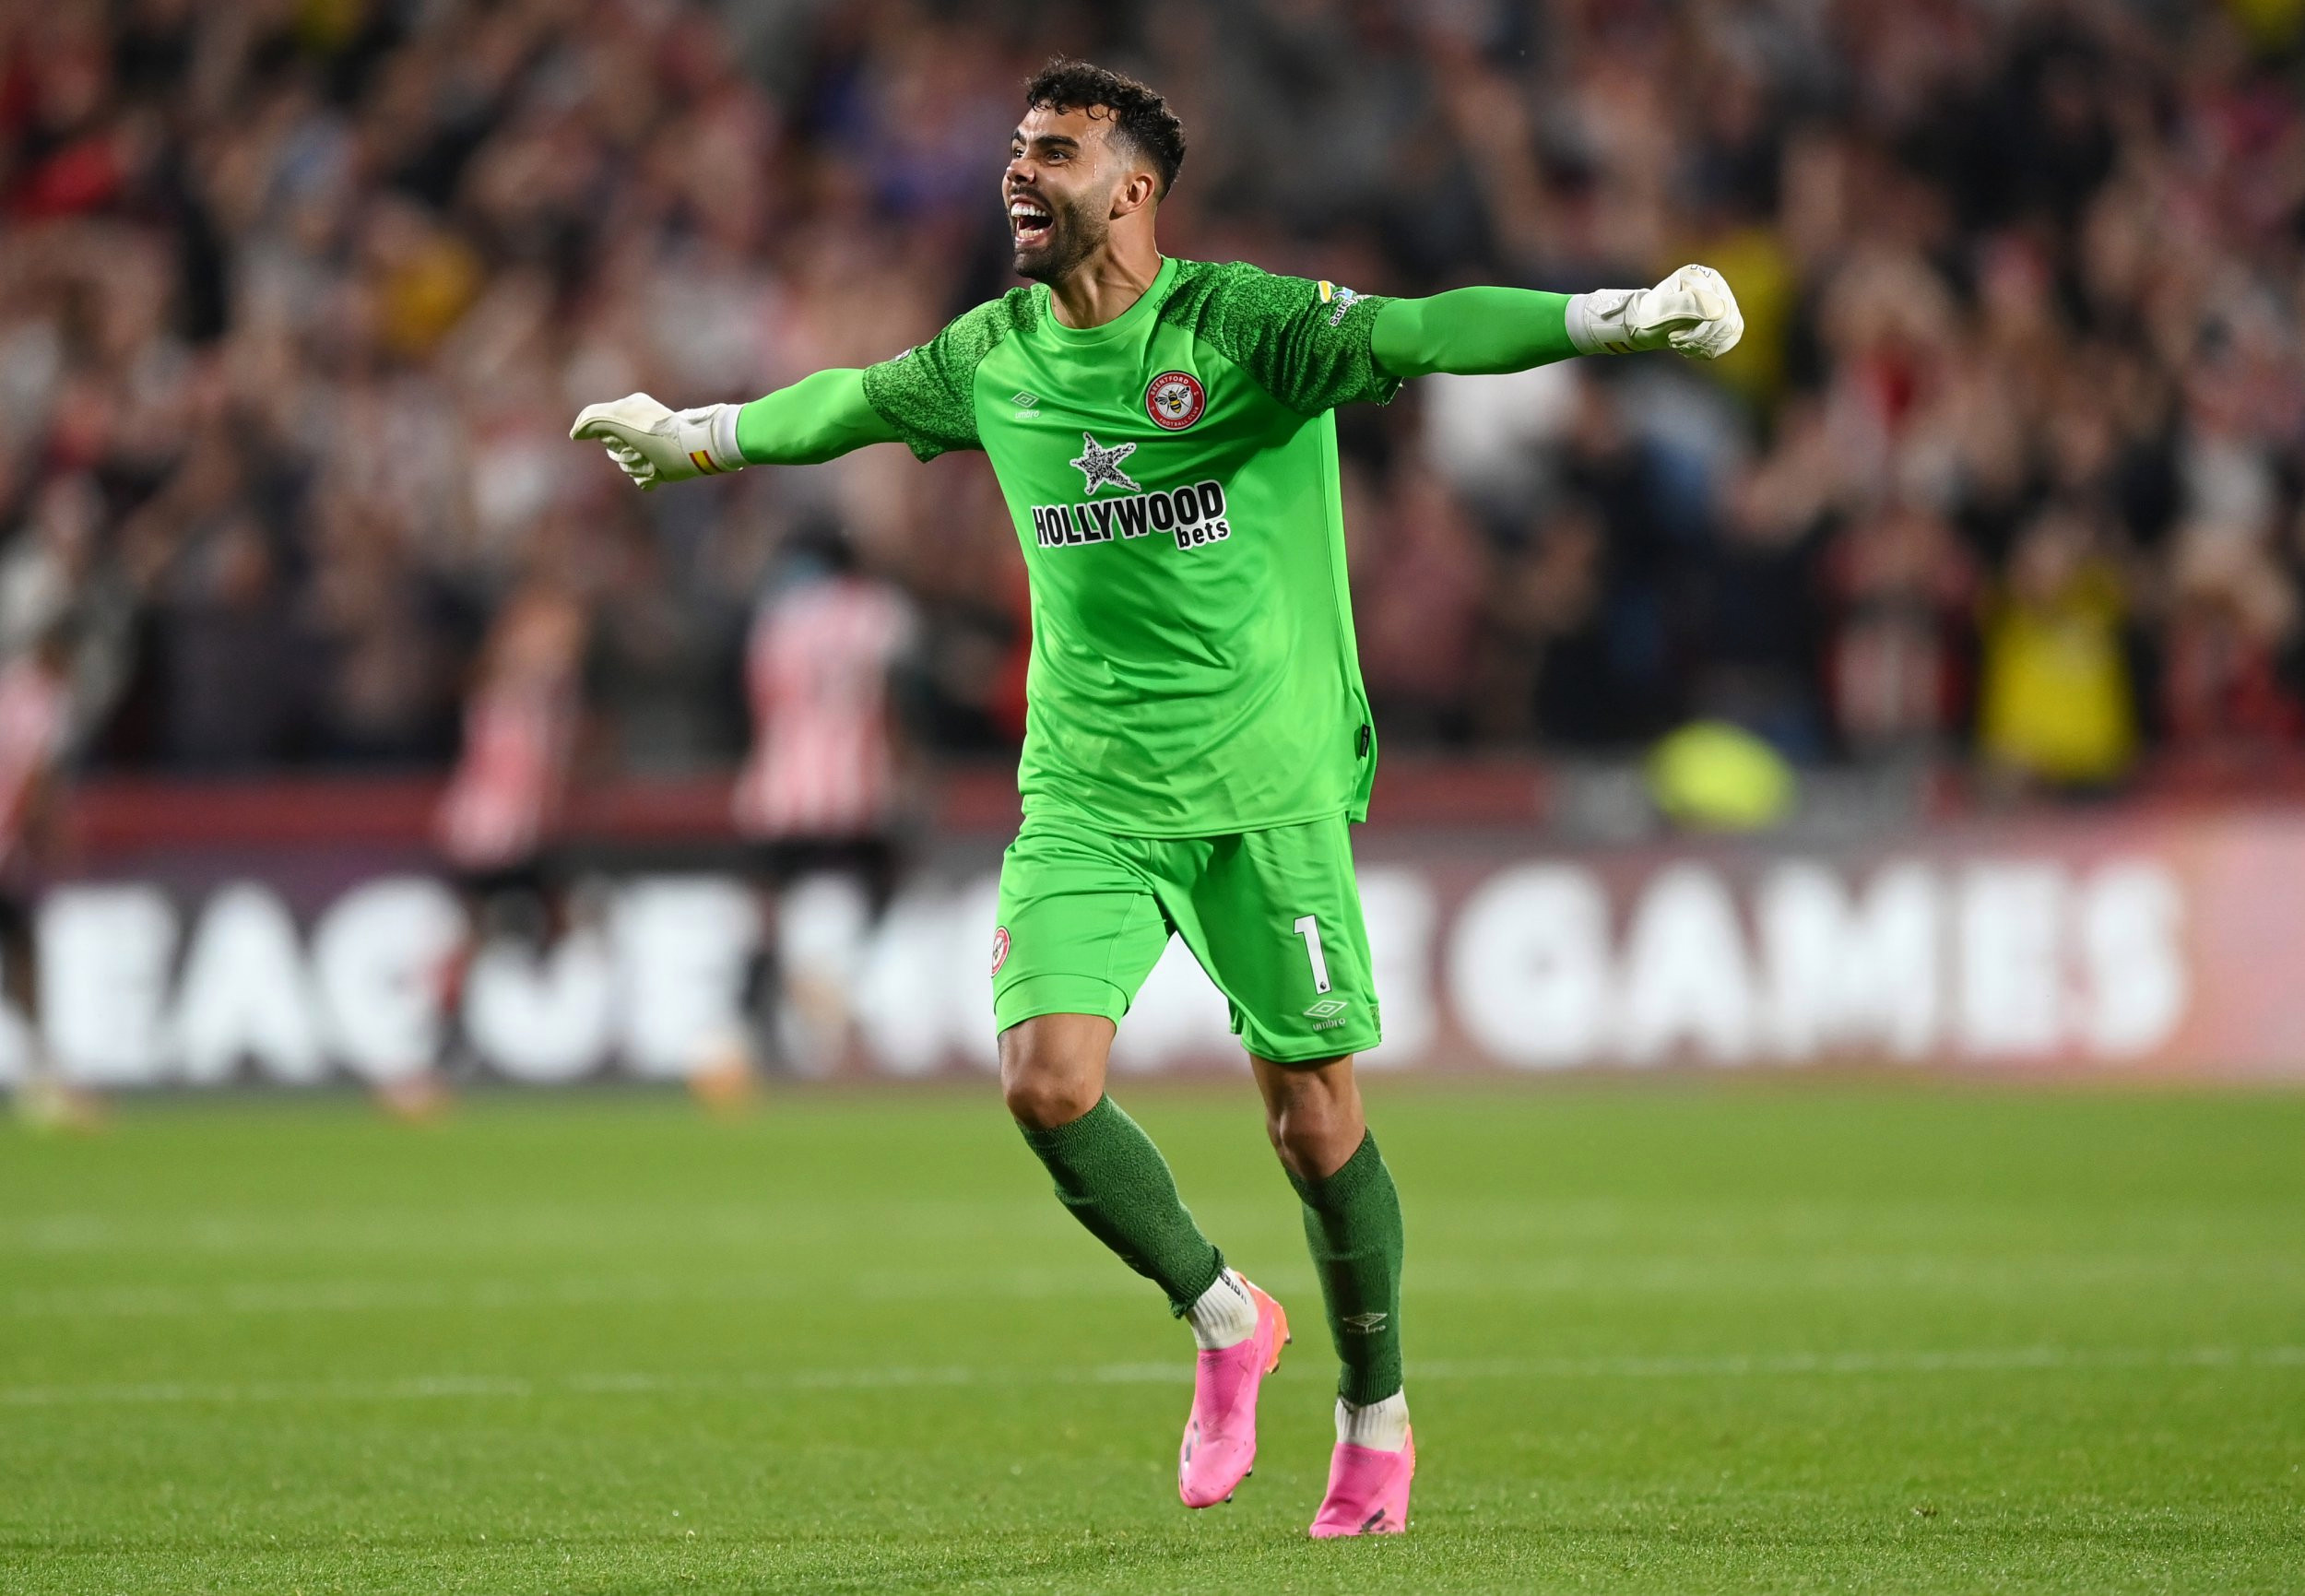 ‘We just have to be ourselves’ – David Raya predicts Brentford will claim more Premier League scalps after Arsenal upset